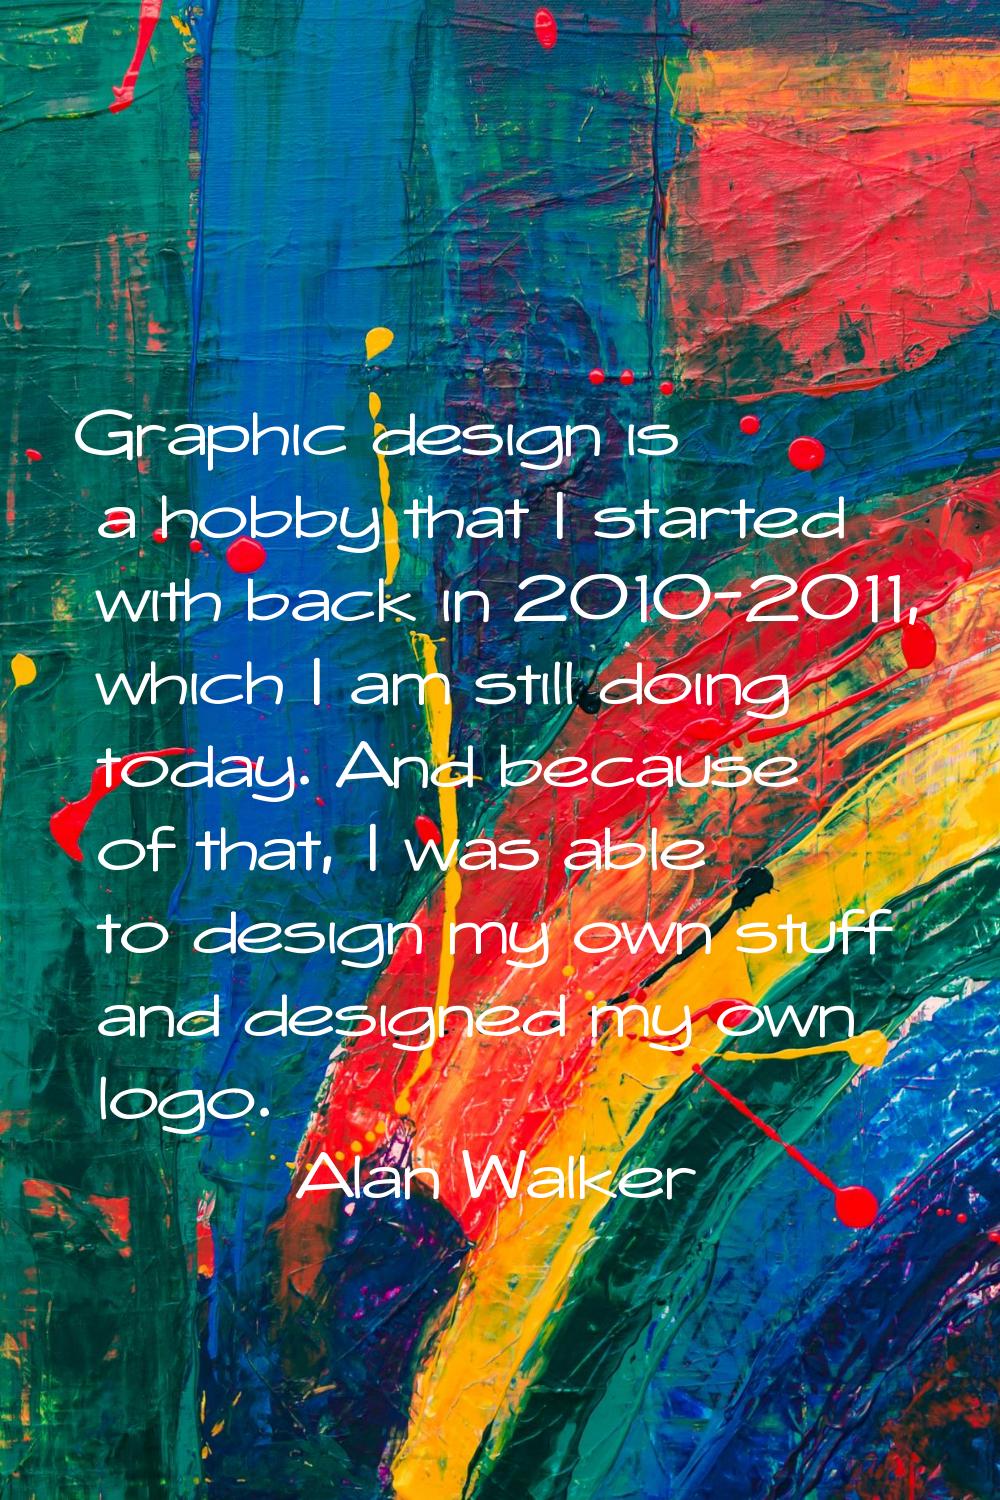 Graphic design is a hobby that I started with back in 2010-2011, which I am still doing today. And 